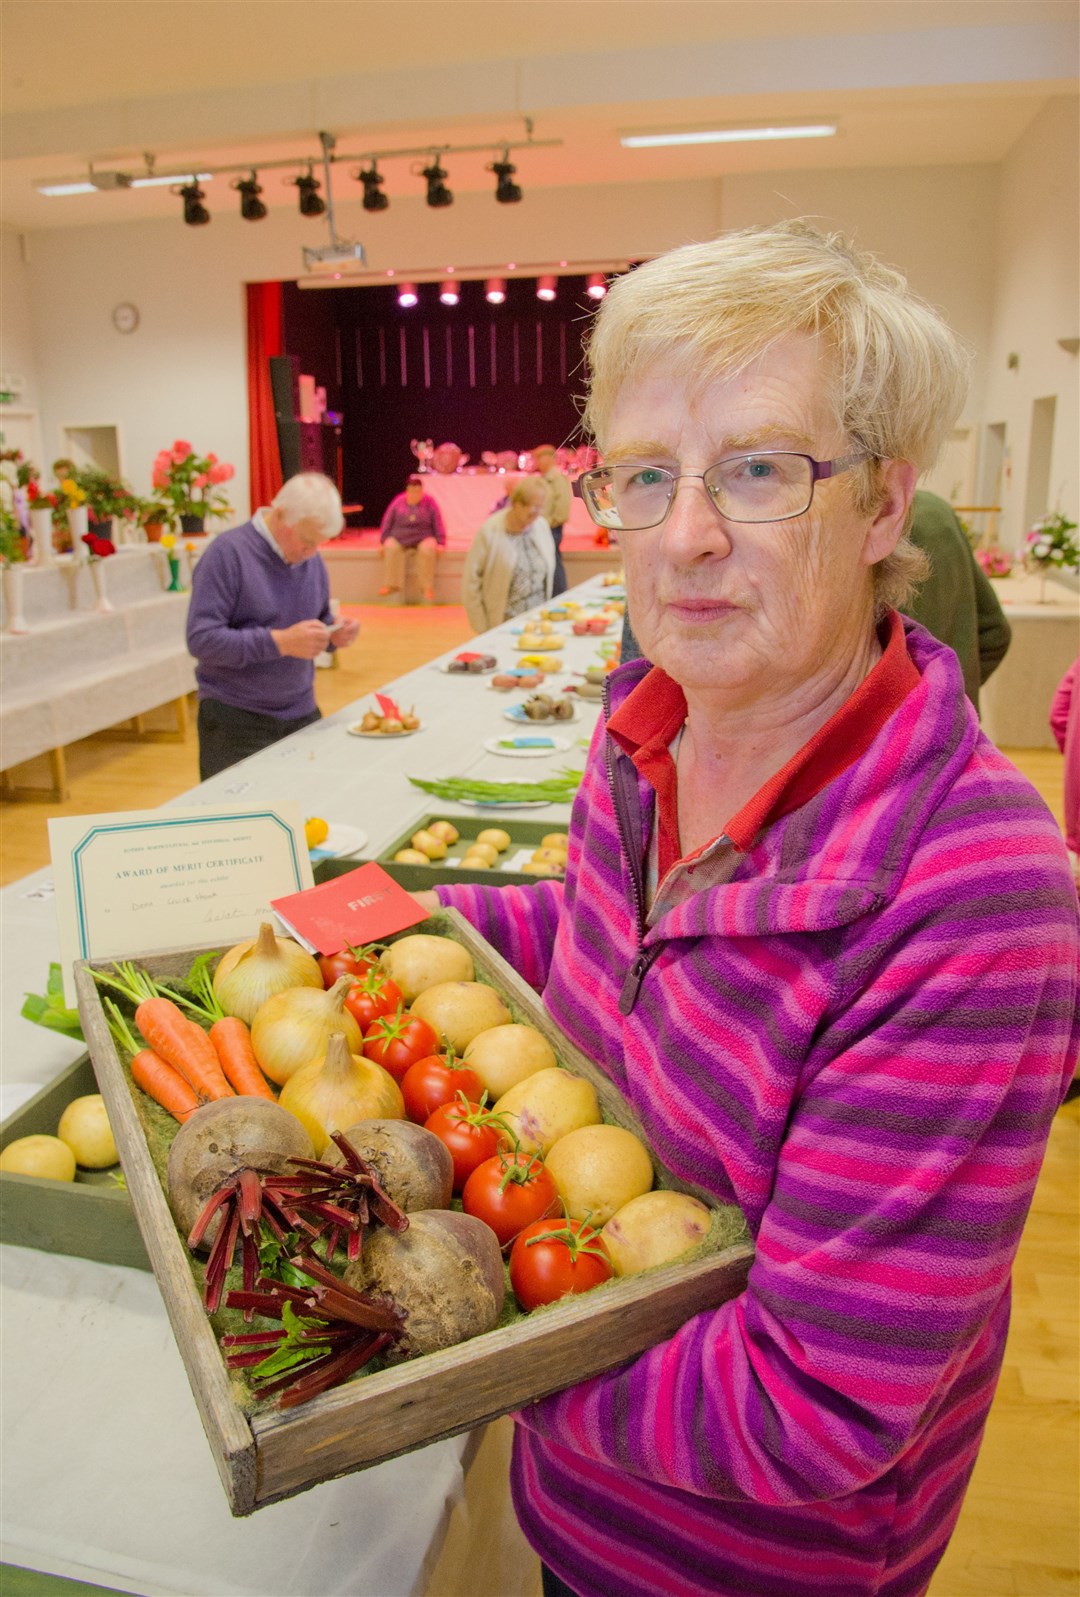 President Dena Cruickshank, pictured with her box of vegetables at last year's show, is urging exhibitors to make the 2019 showcase one to remember. Picture: Daniel Forsyth. Image No.041942.